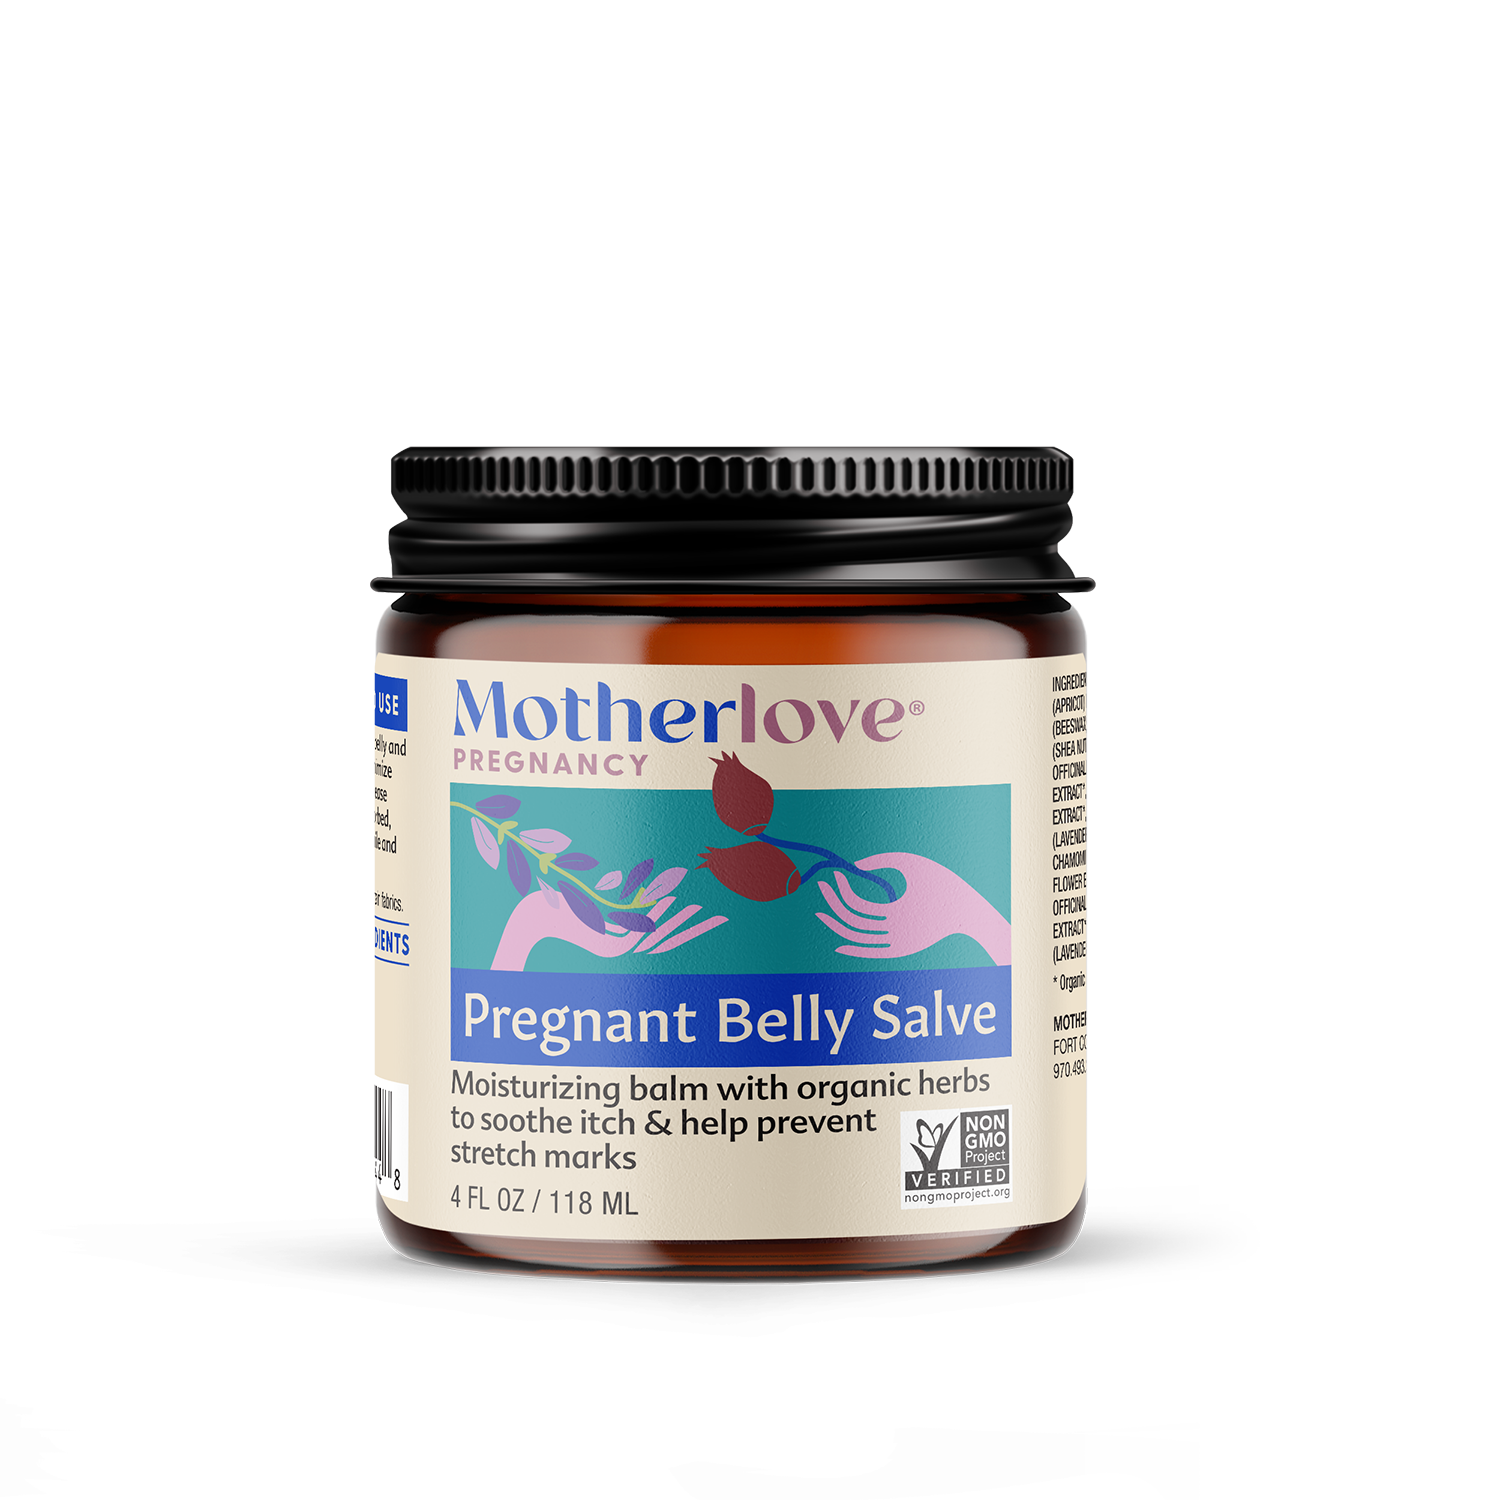 picture of a bottle of motherlove birth and baby oil and how it is formulated for moms and babies, use of lower back and vaginal area during labor, use during baby massage, moisturizes skin after bath time, great for dry scalp